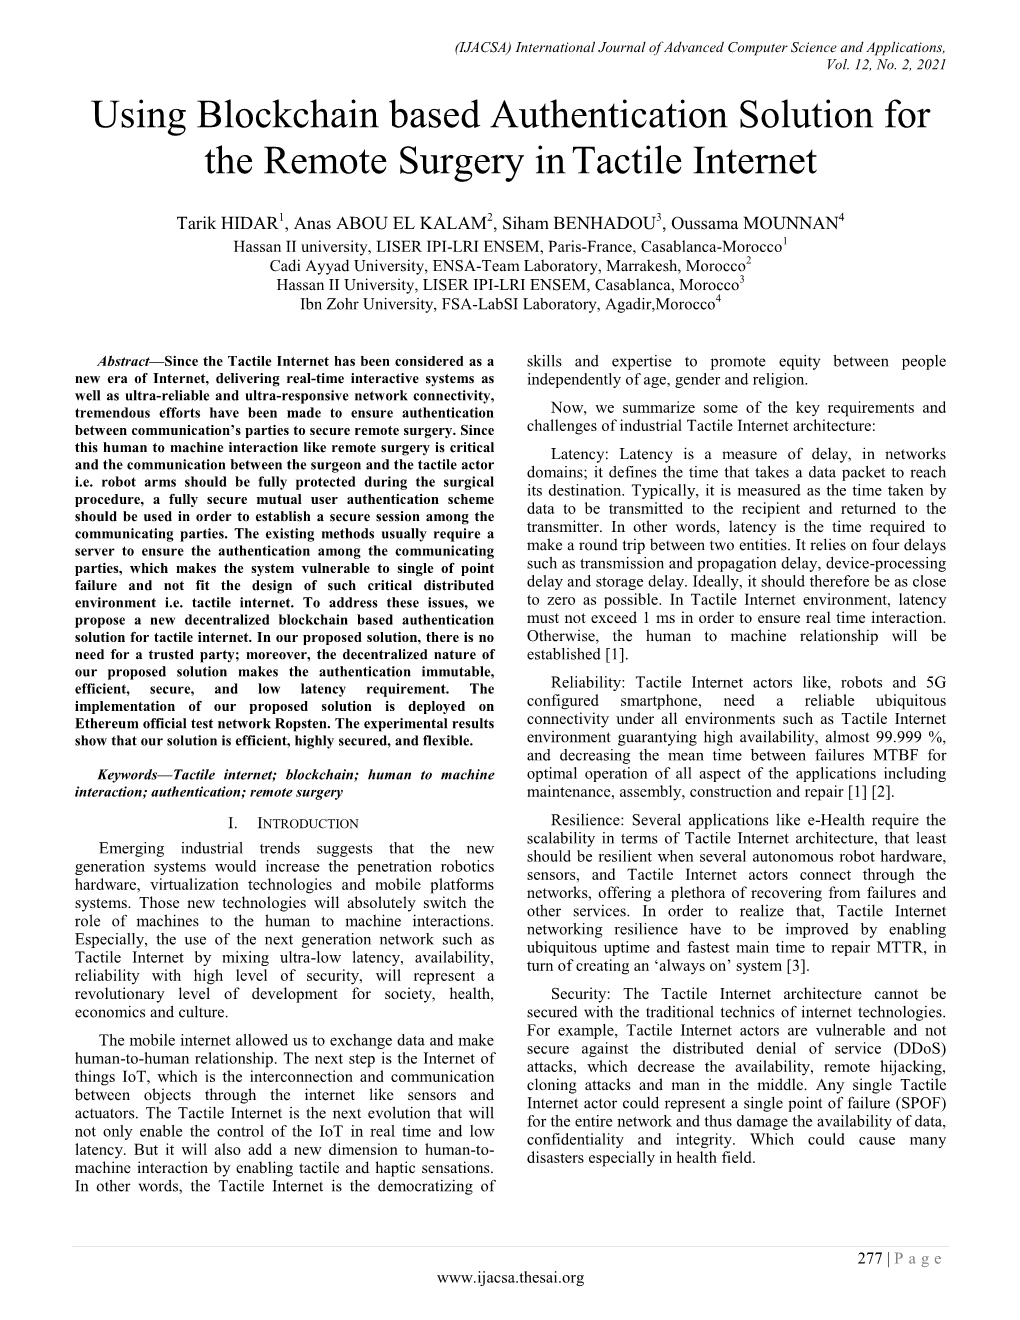 Using Blockchain Based Authentication Solution for the Remote Surgery in Tactile Internet